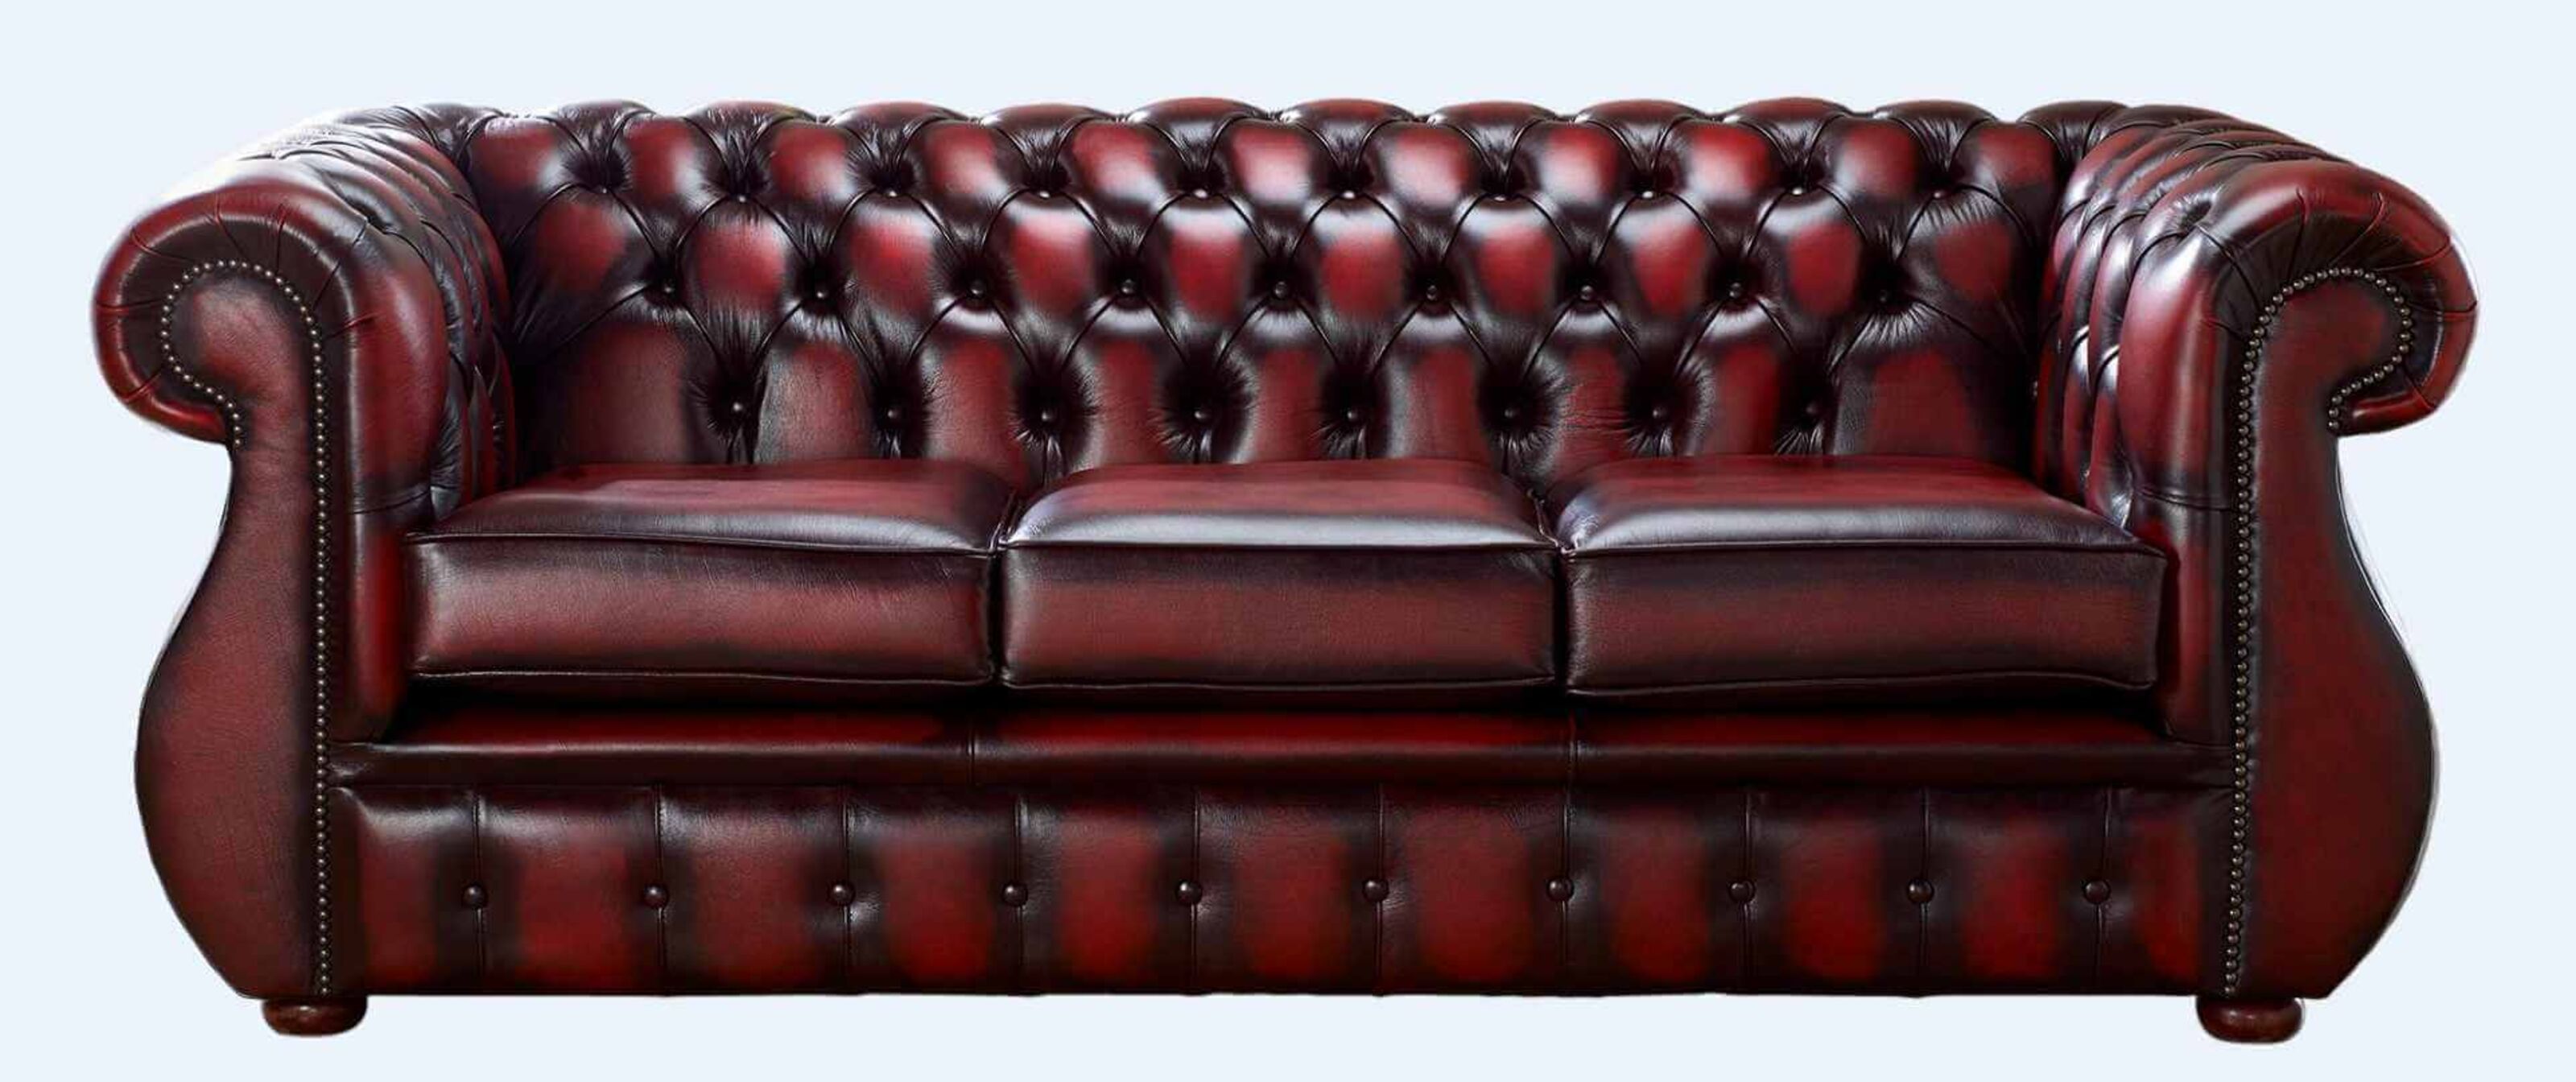 Chesterfield Chronicles User Experiences with Top Sofa Companies Reviewed  %Post Title